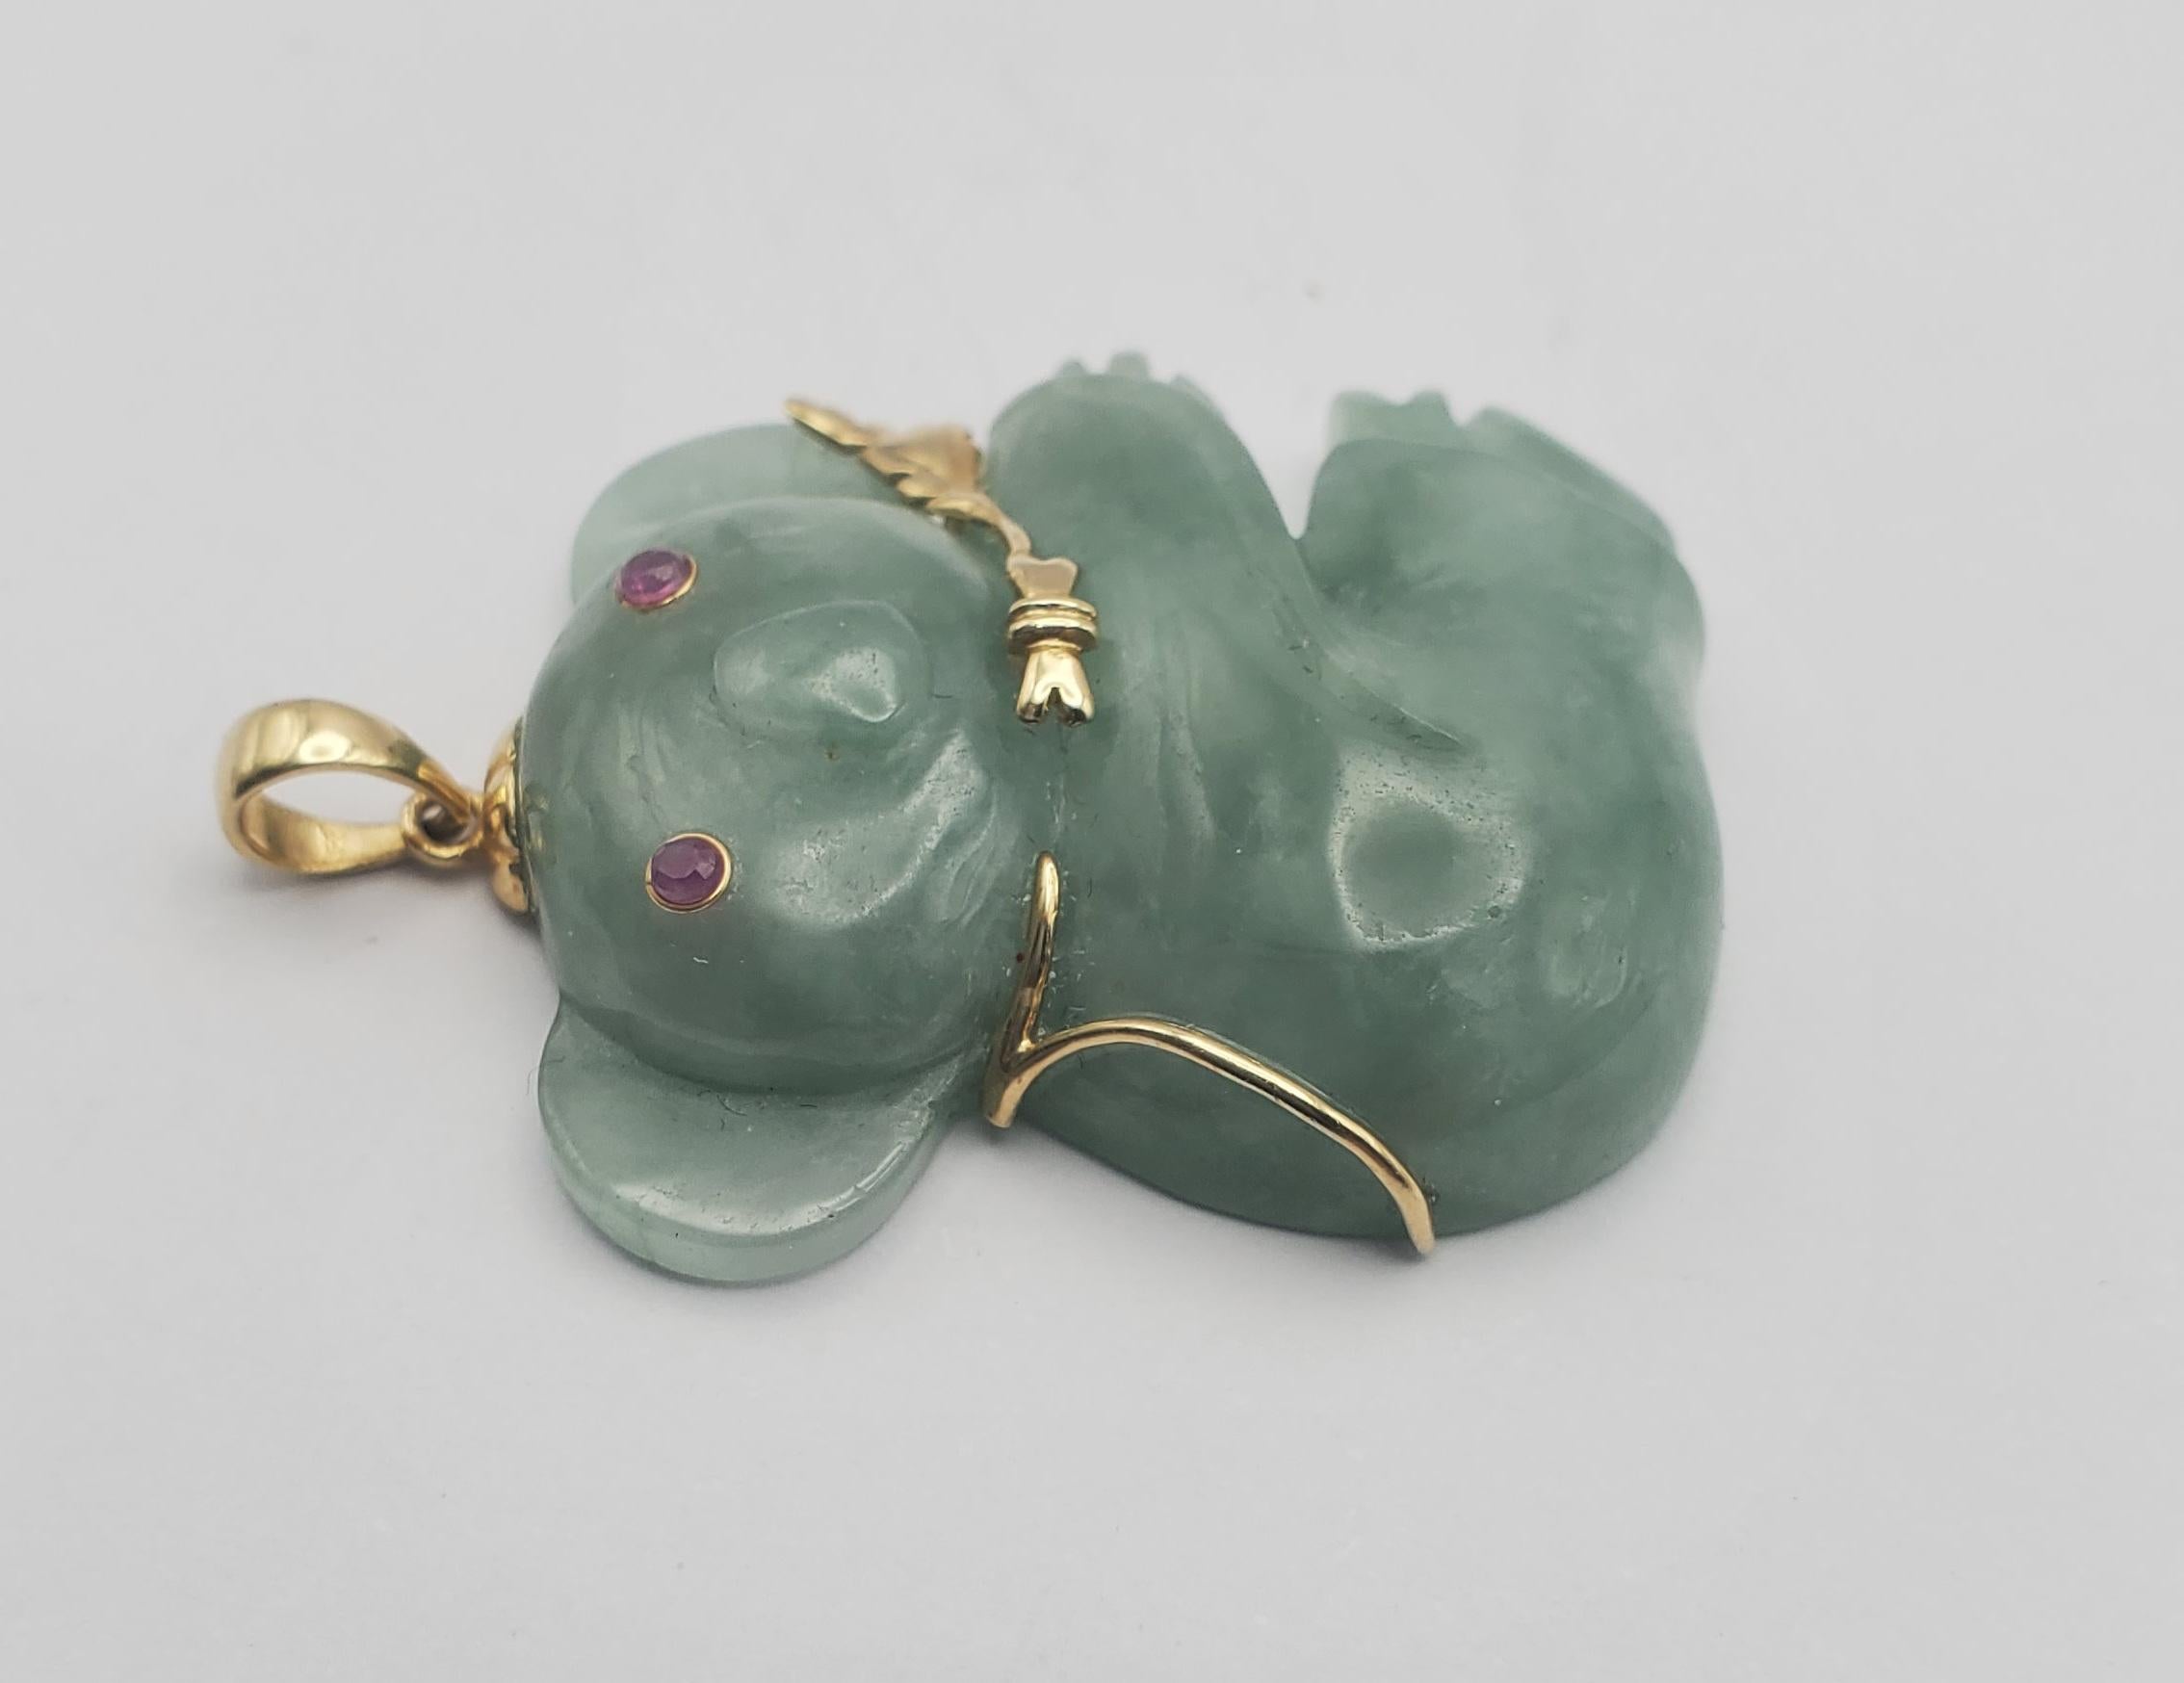 Charming carved jadeite koala pendant with 14k yellow gold and ruby accents. The jadeite is a pretty sage green color, green with blue undertones, that looks refined when combined with the yellow gold. The koala features bezel set round ruby stones